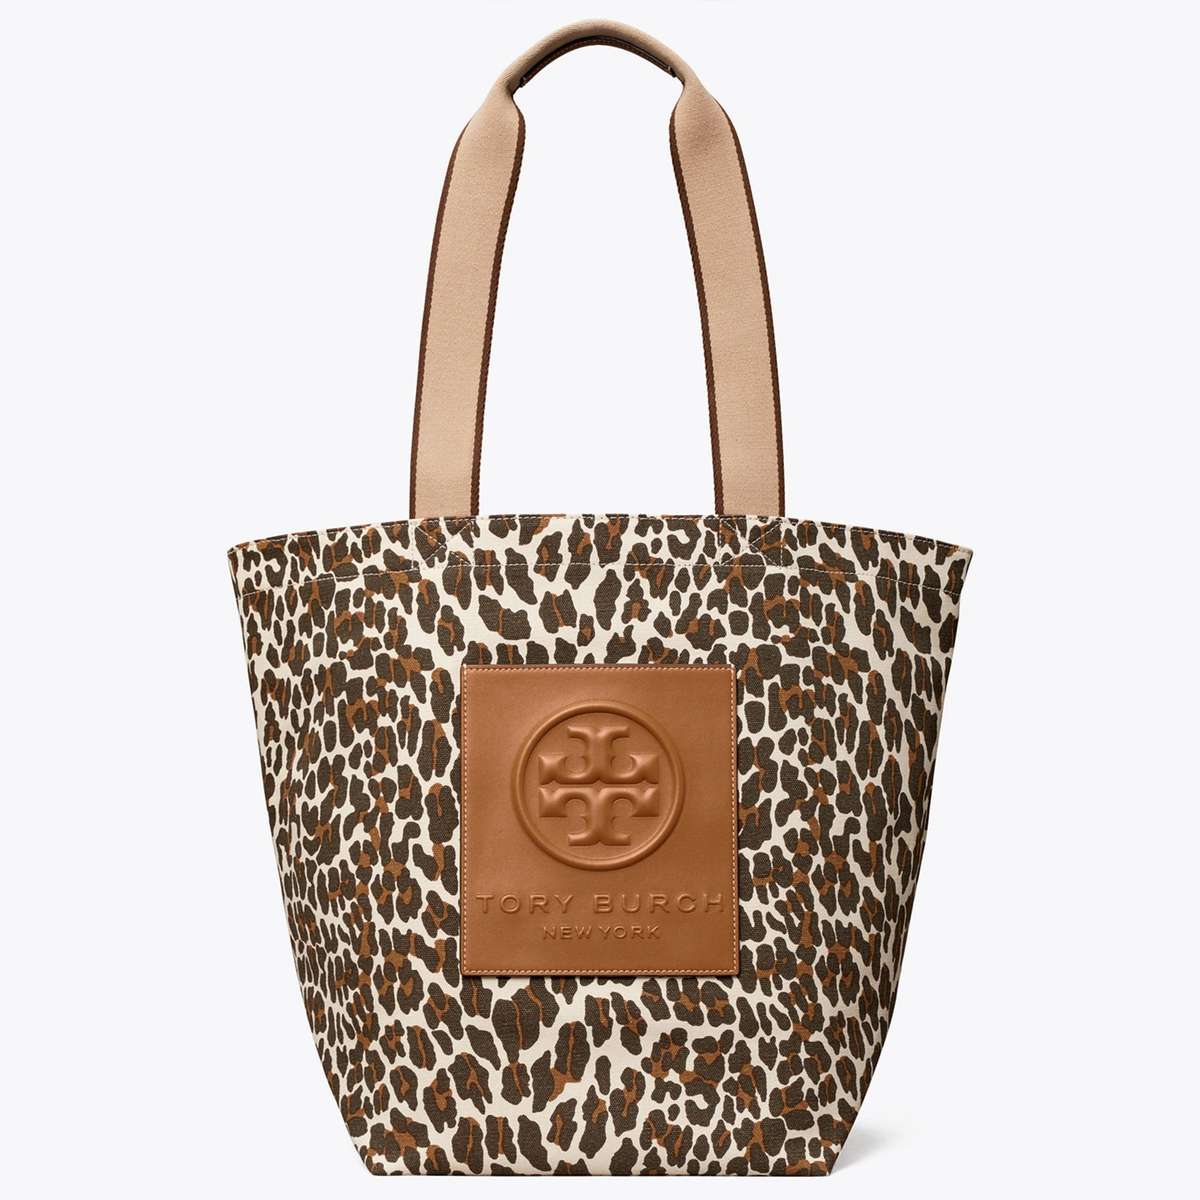 Tory Burch Mother's Day Gifts